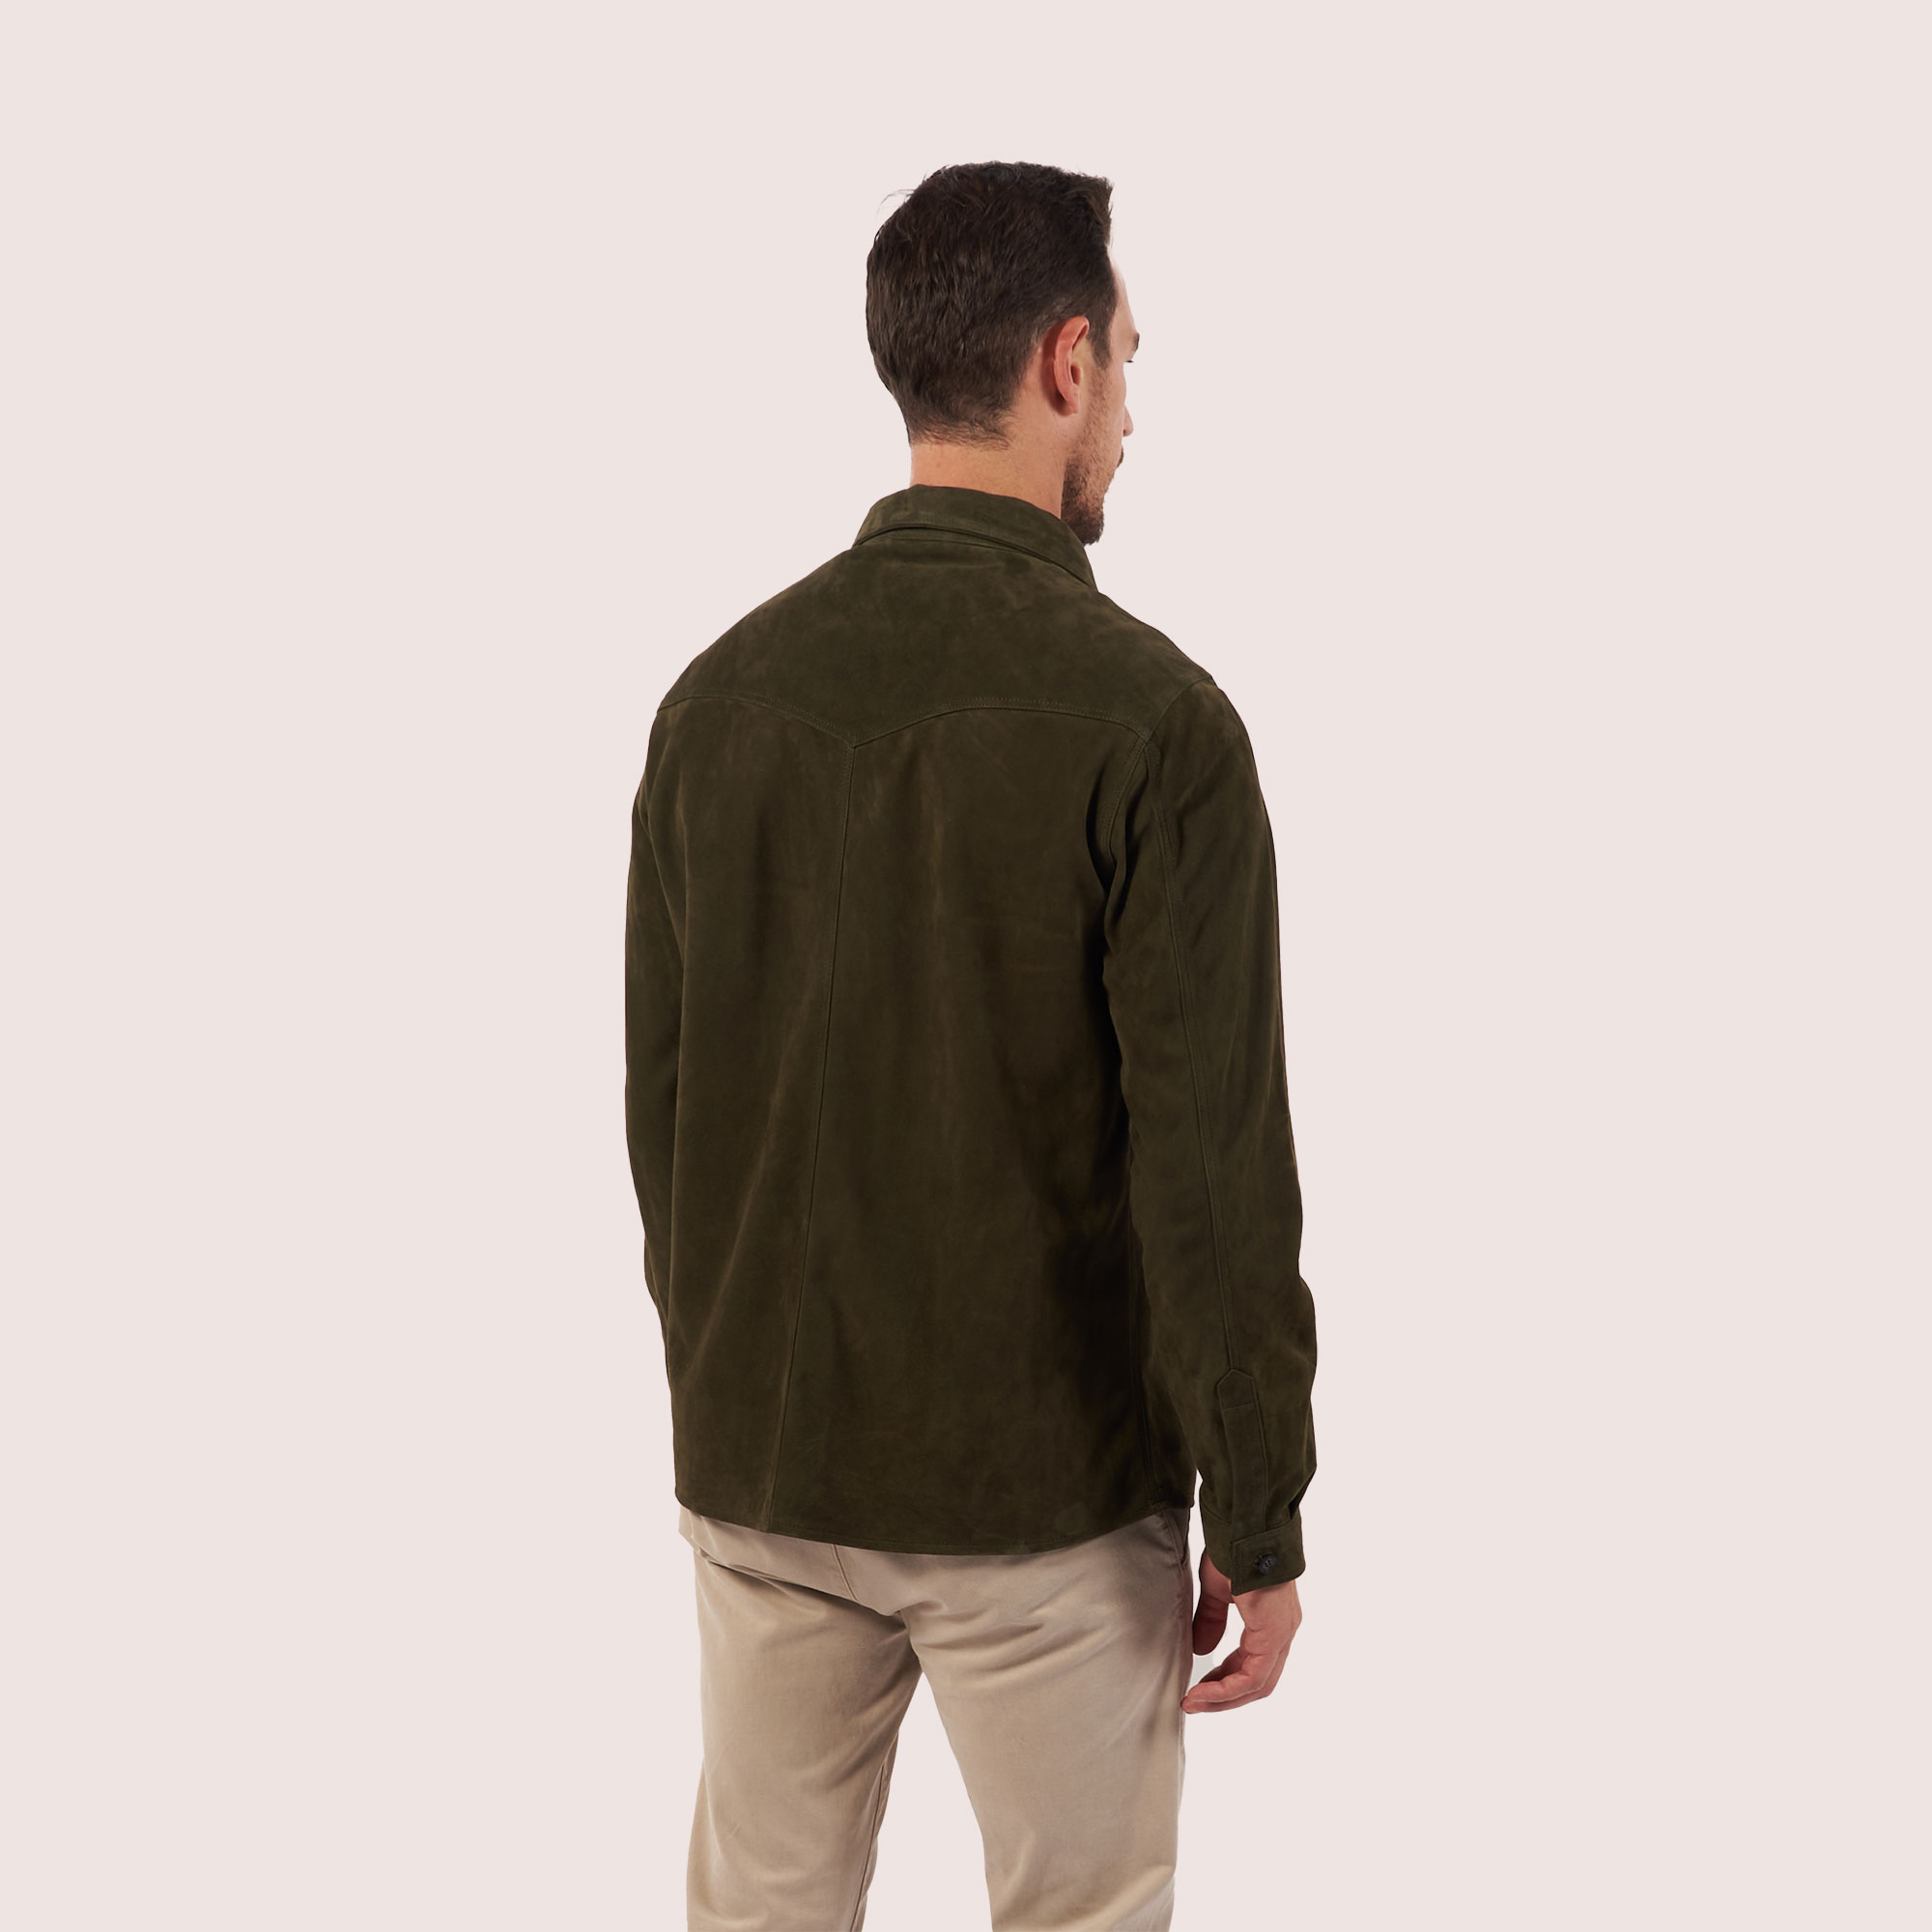 Langley goat suede shirt